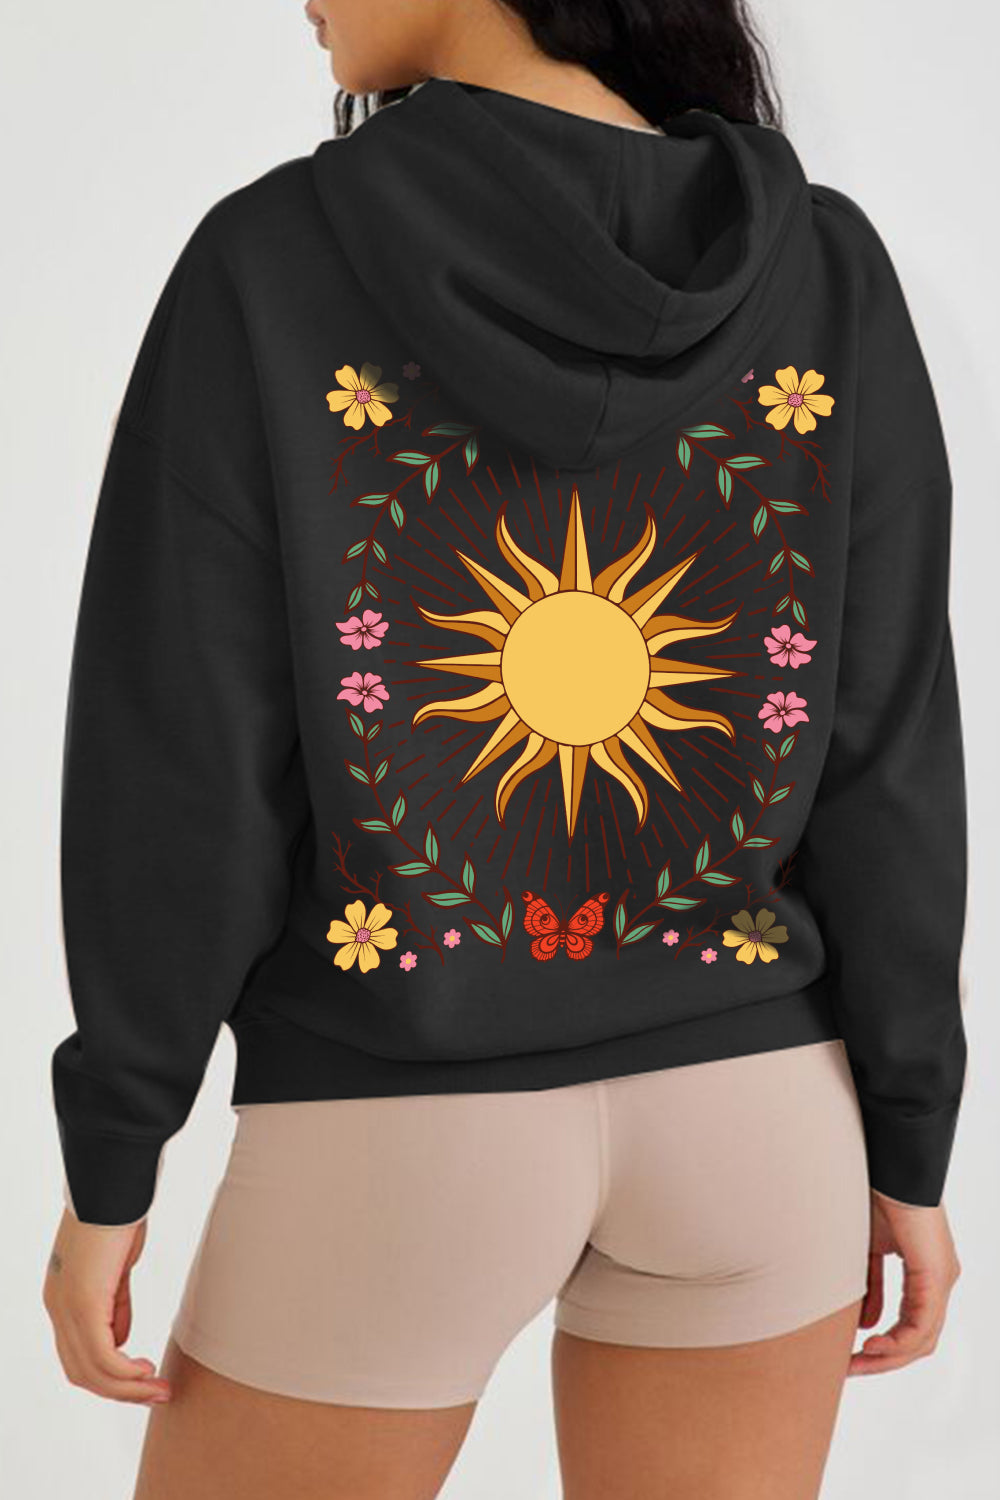 Simply Love Simply Love Full Size Sun Graphic Hooded Jacket